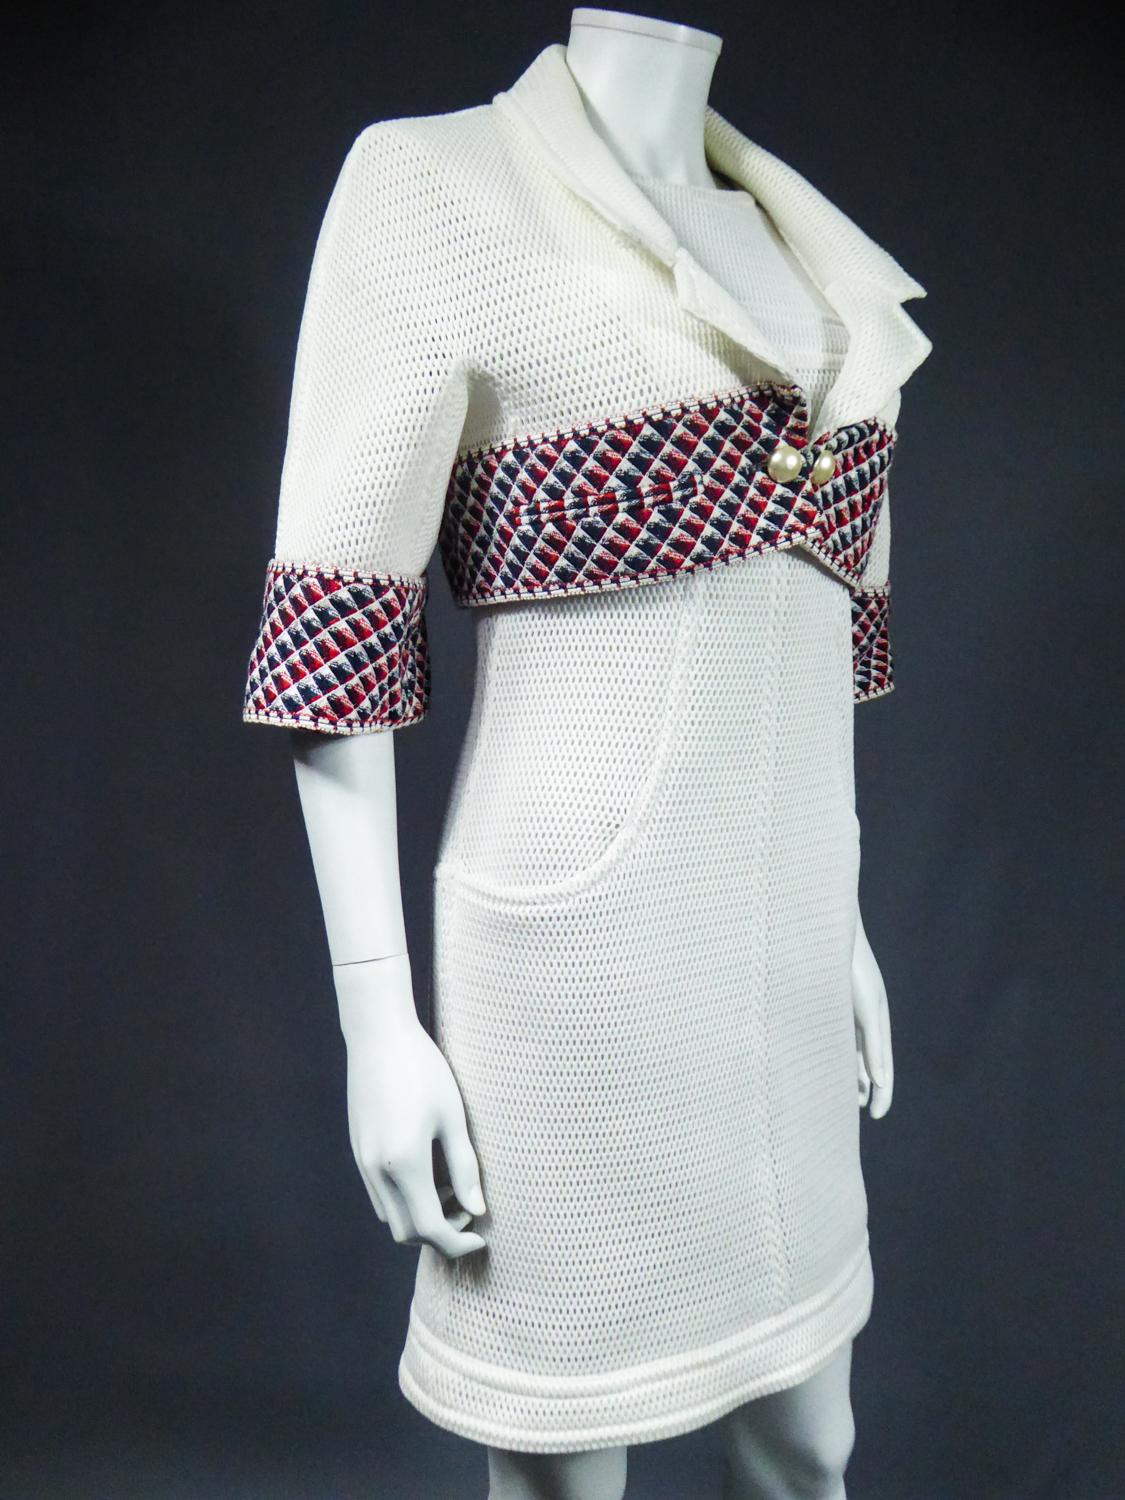 Chanel Dress and Bolero - Karl Lagerfeld Spring Summer 2013 Collection For Sale 2